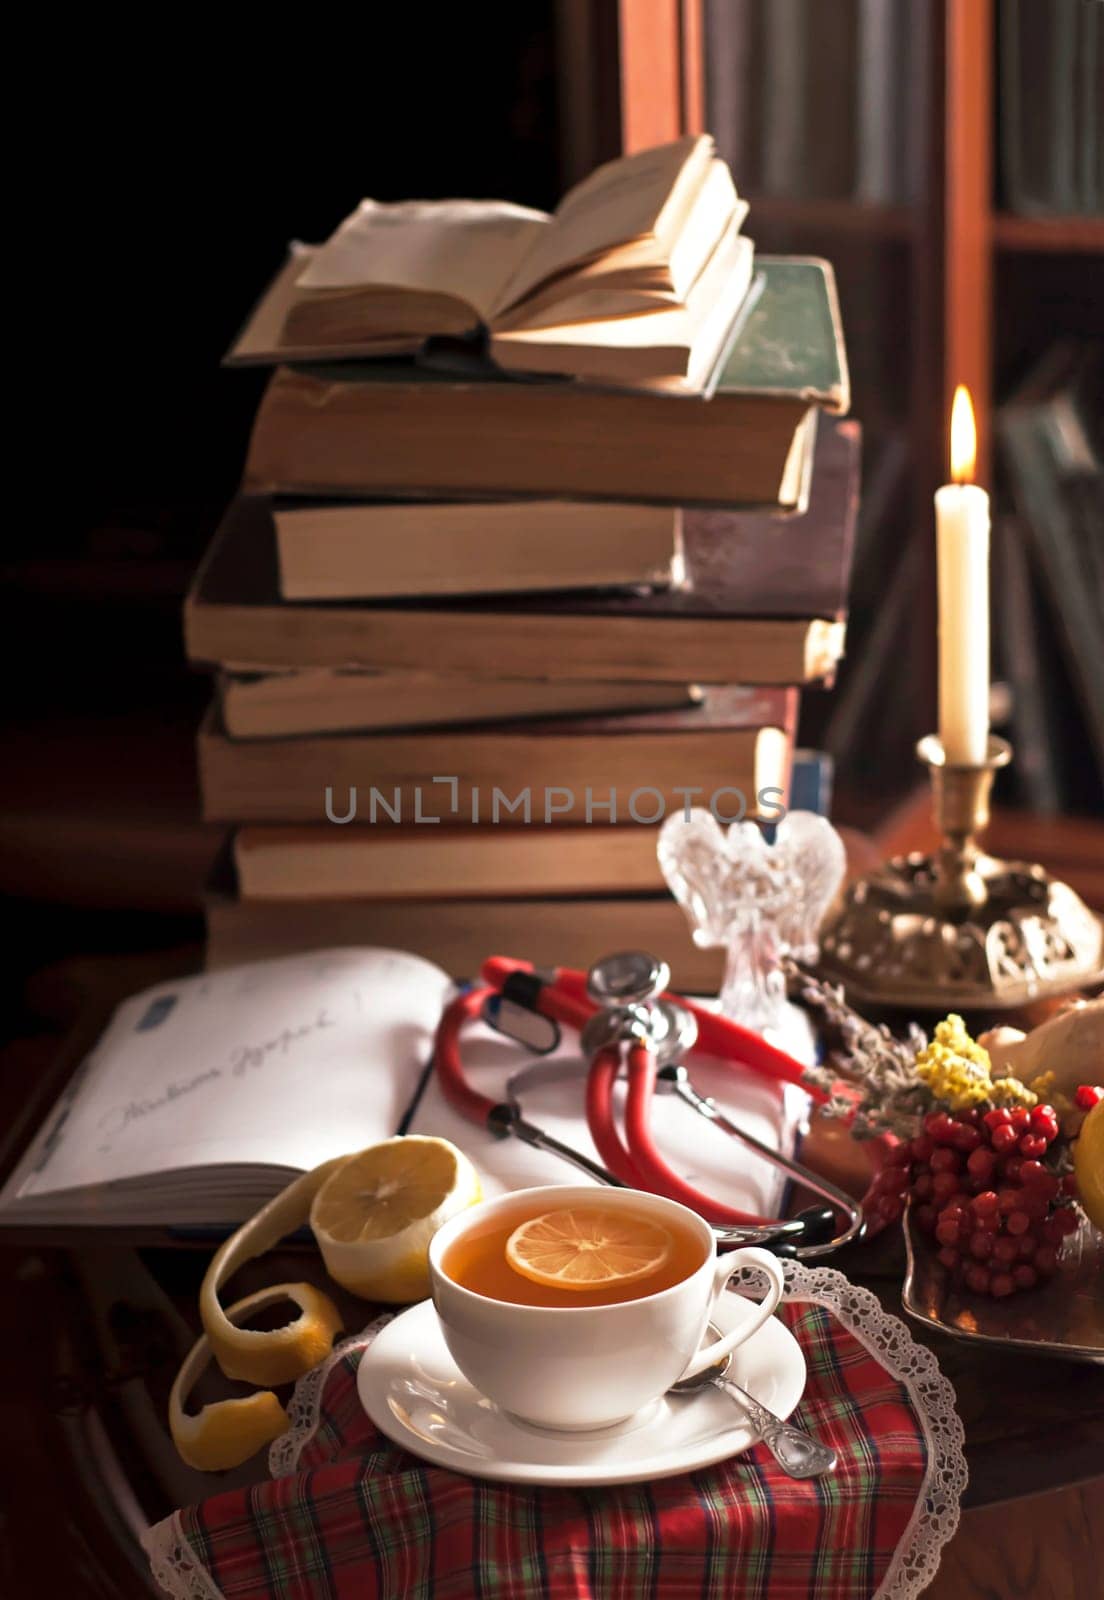 A stack of vintage books, a phonendoscope, a cup of tea with lemon, an open notepad, medicinal plants on a wooden table